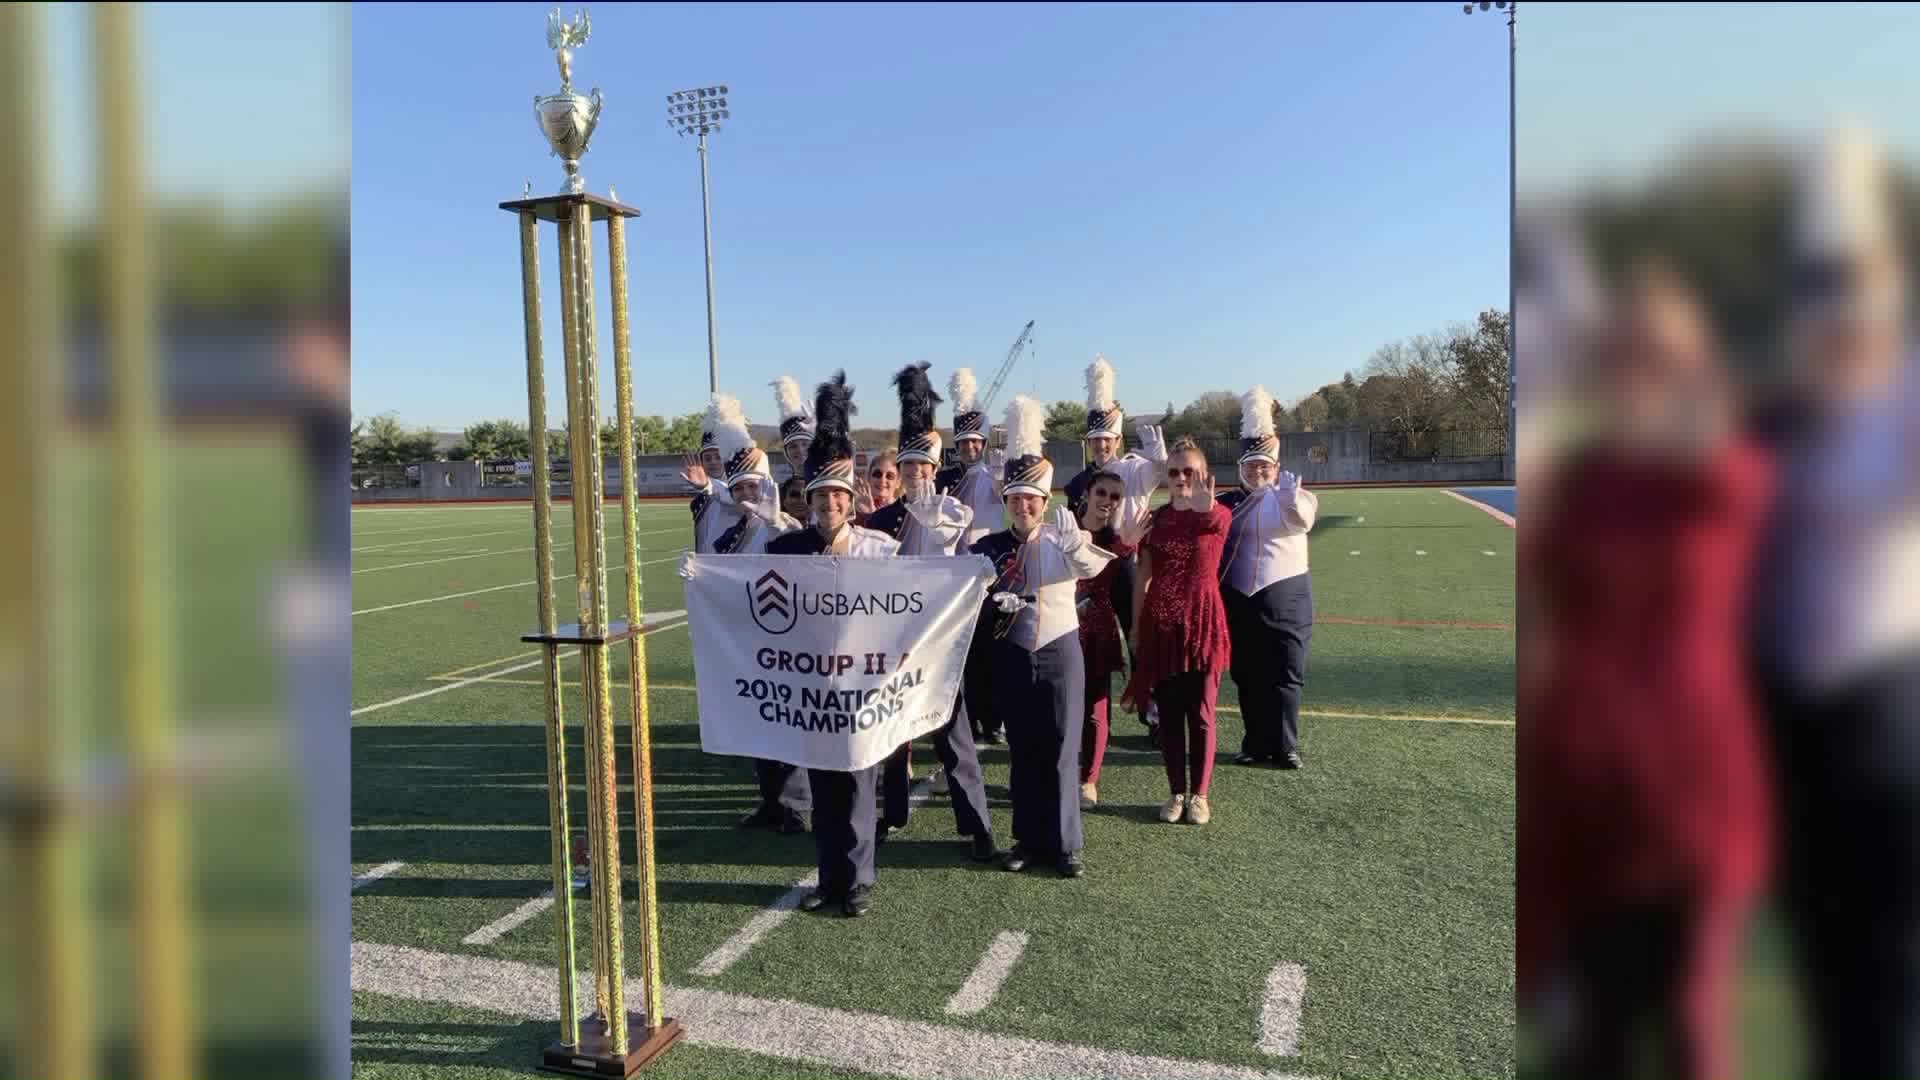 East Haven High School marching band lands top score at US Band Nationals